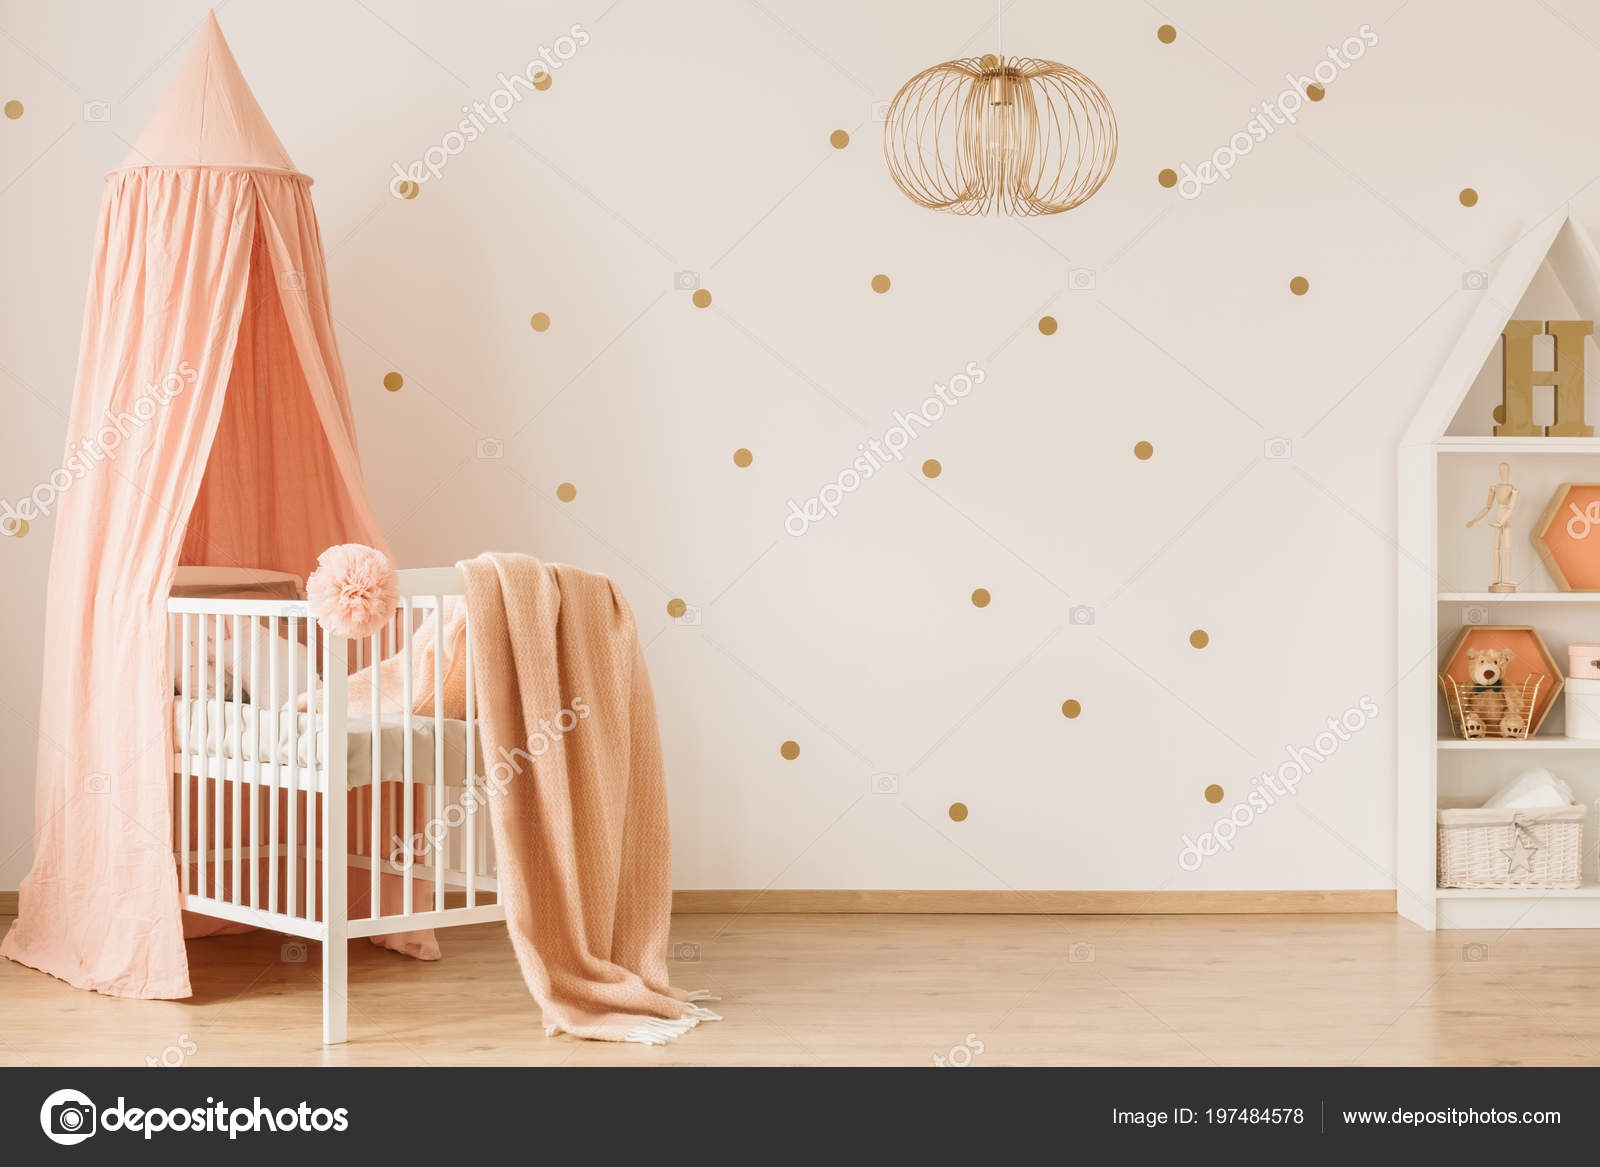 Pmages Gold And Pink Room Decor Bright Baby Girl Room Interior Dotted Wall Pastel Pink Accents Stock Photo C Photographee Eu 197484578